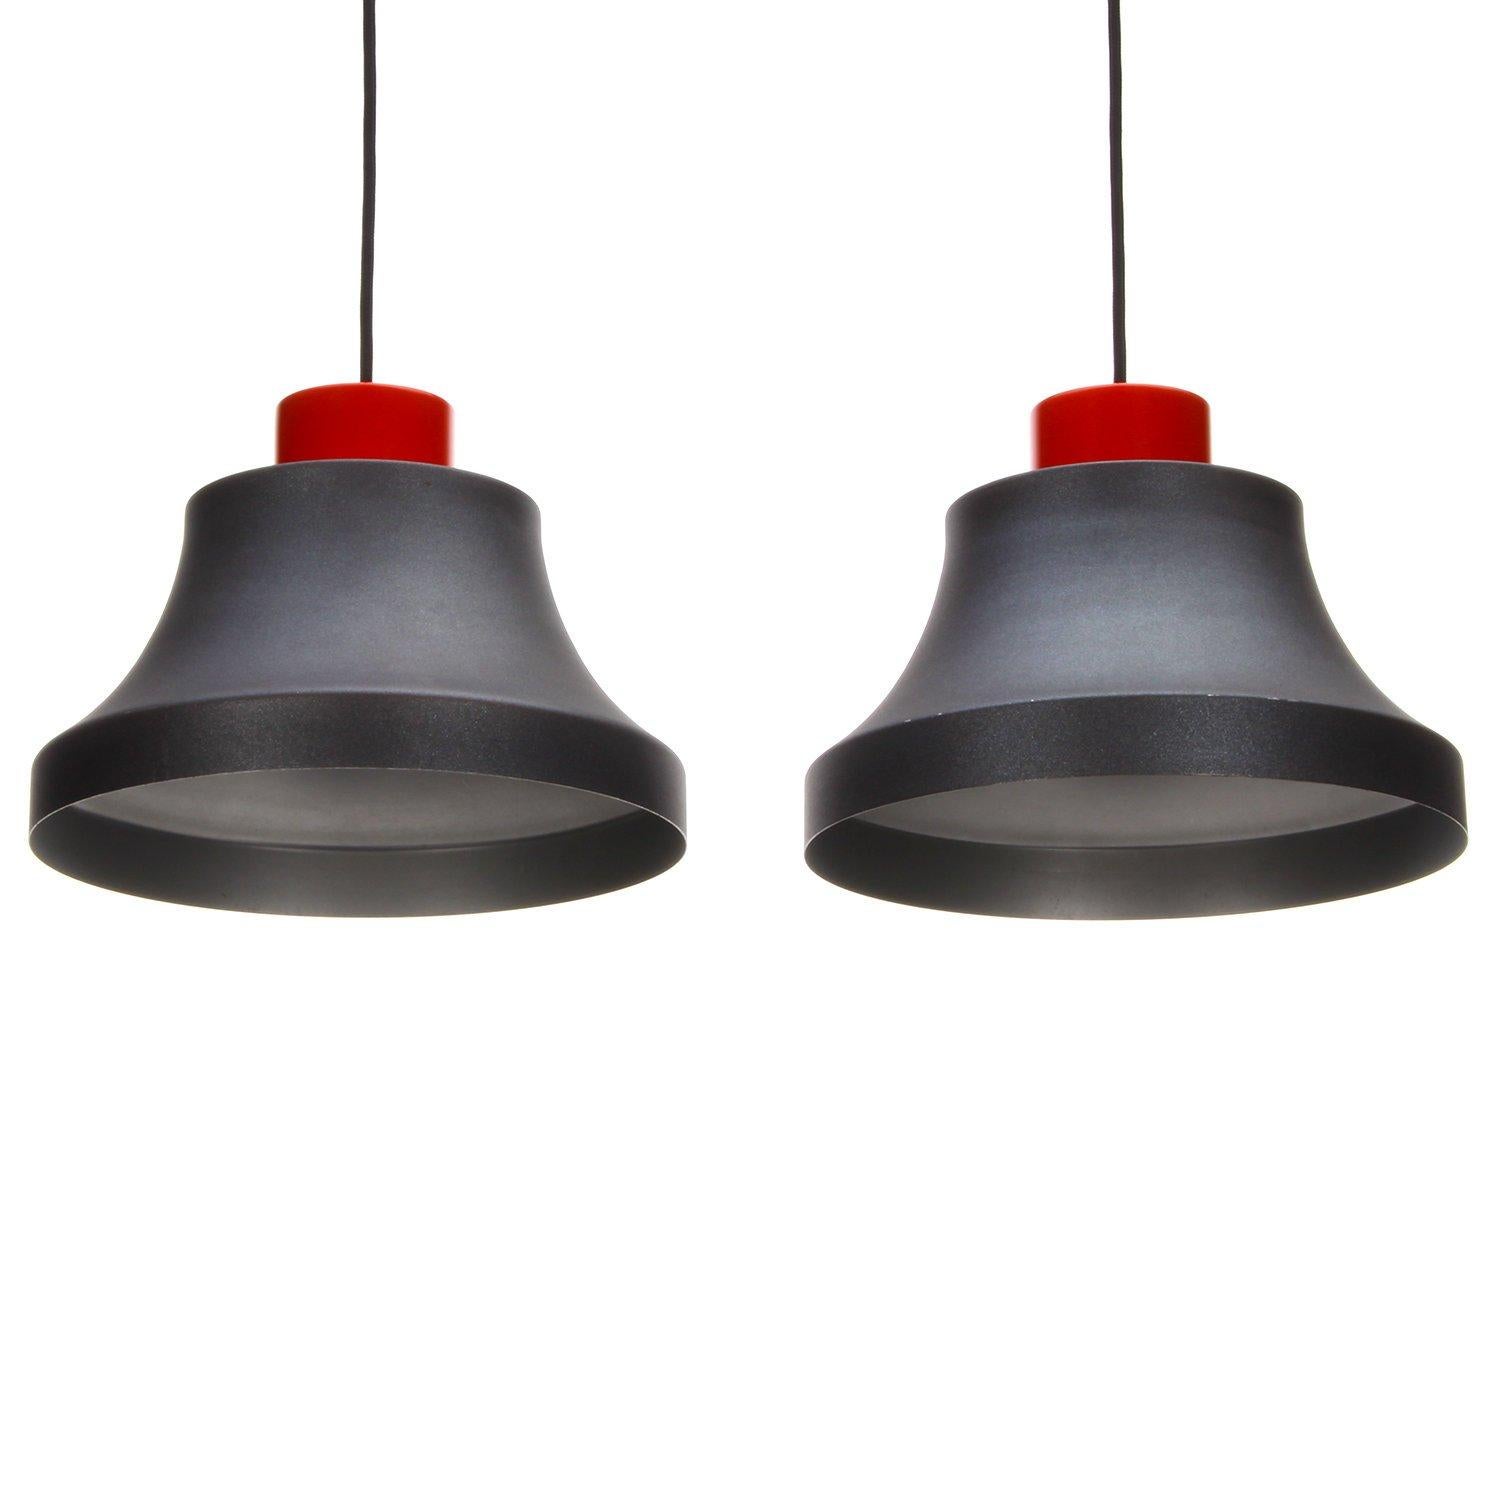 Askepot ‘Cinderella’ Pendant Pair by Jo Hammerborg in 1976-1977 for Fog & Morup (Industriell)